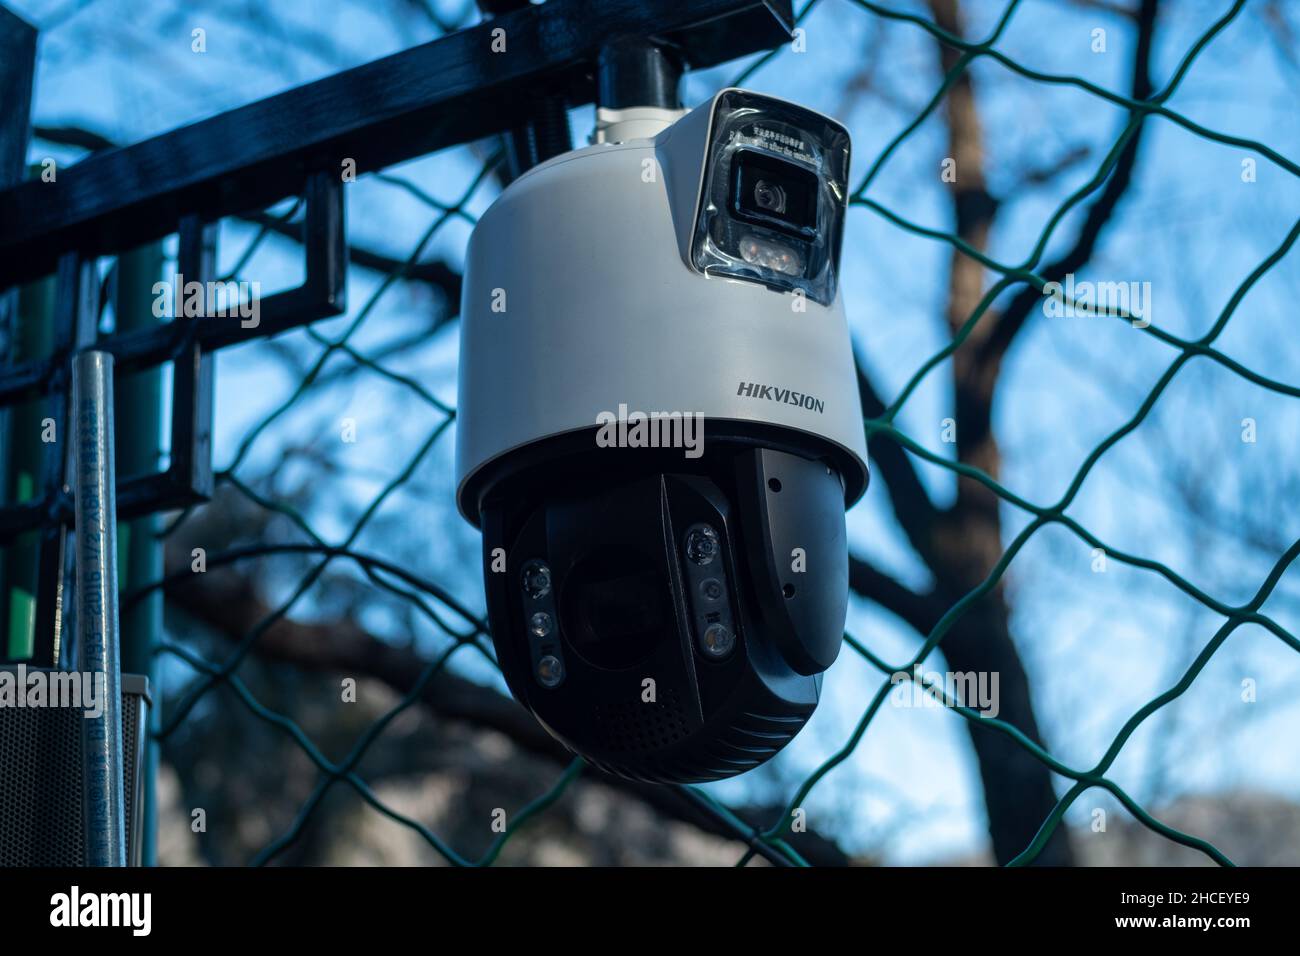 CCTV camera (Hikvision) is seen in Beijing, China. Stock Photo